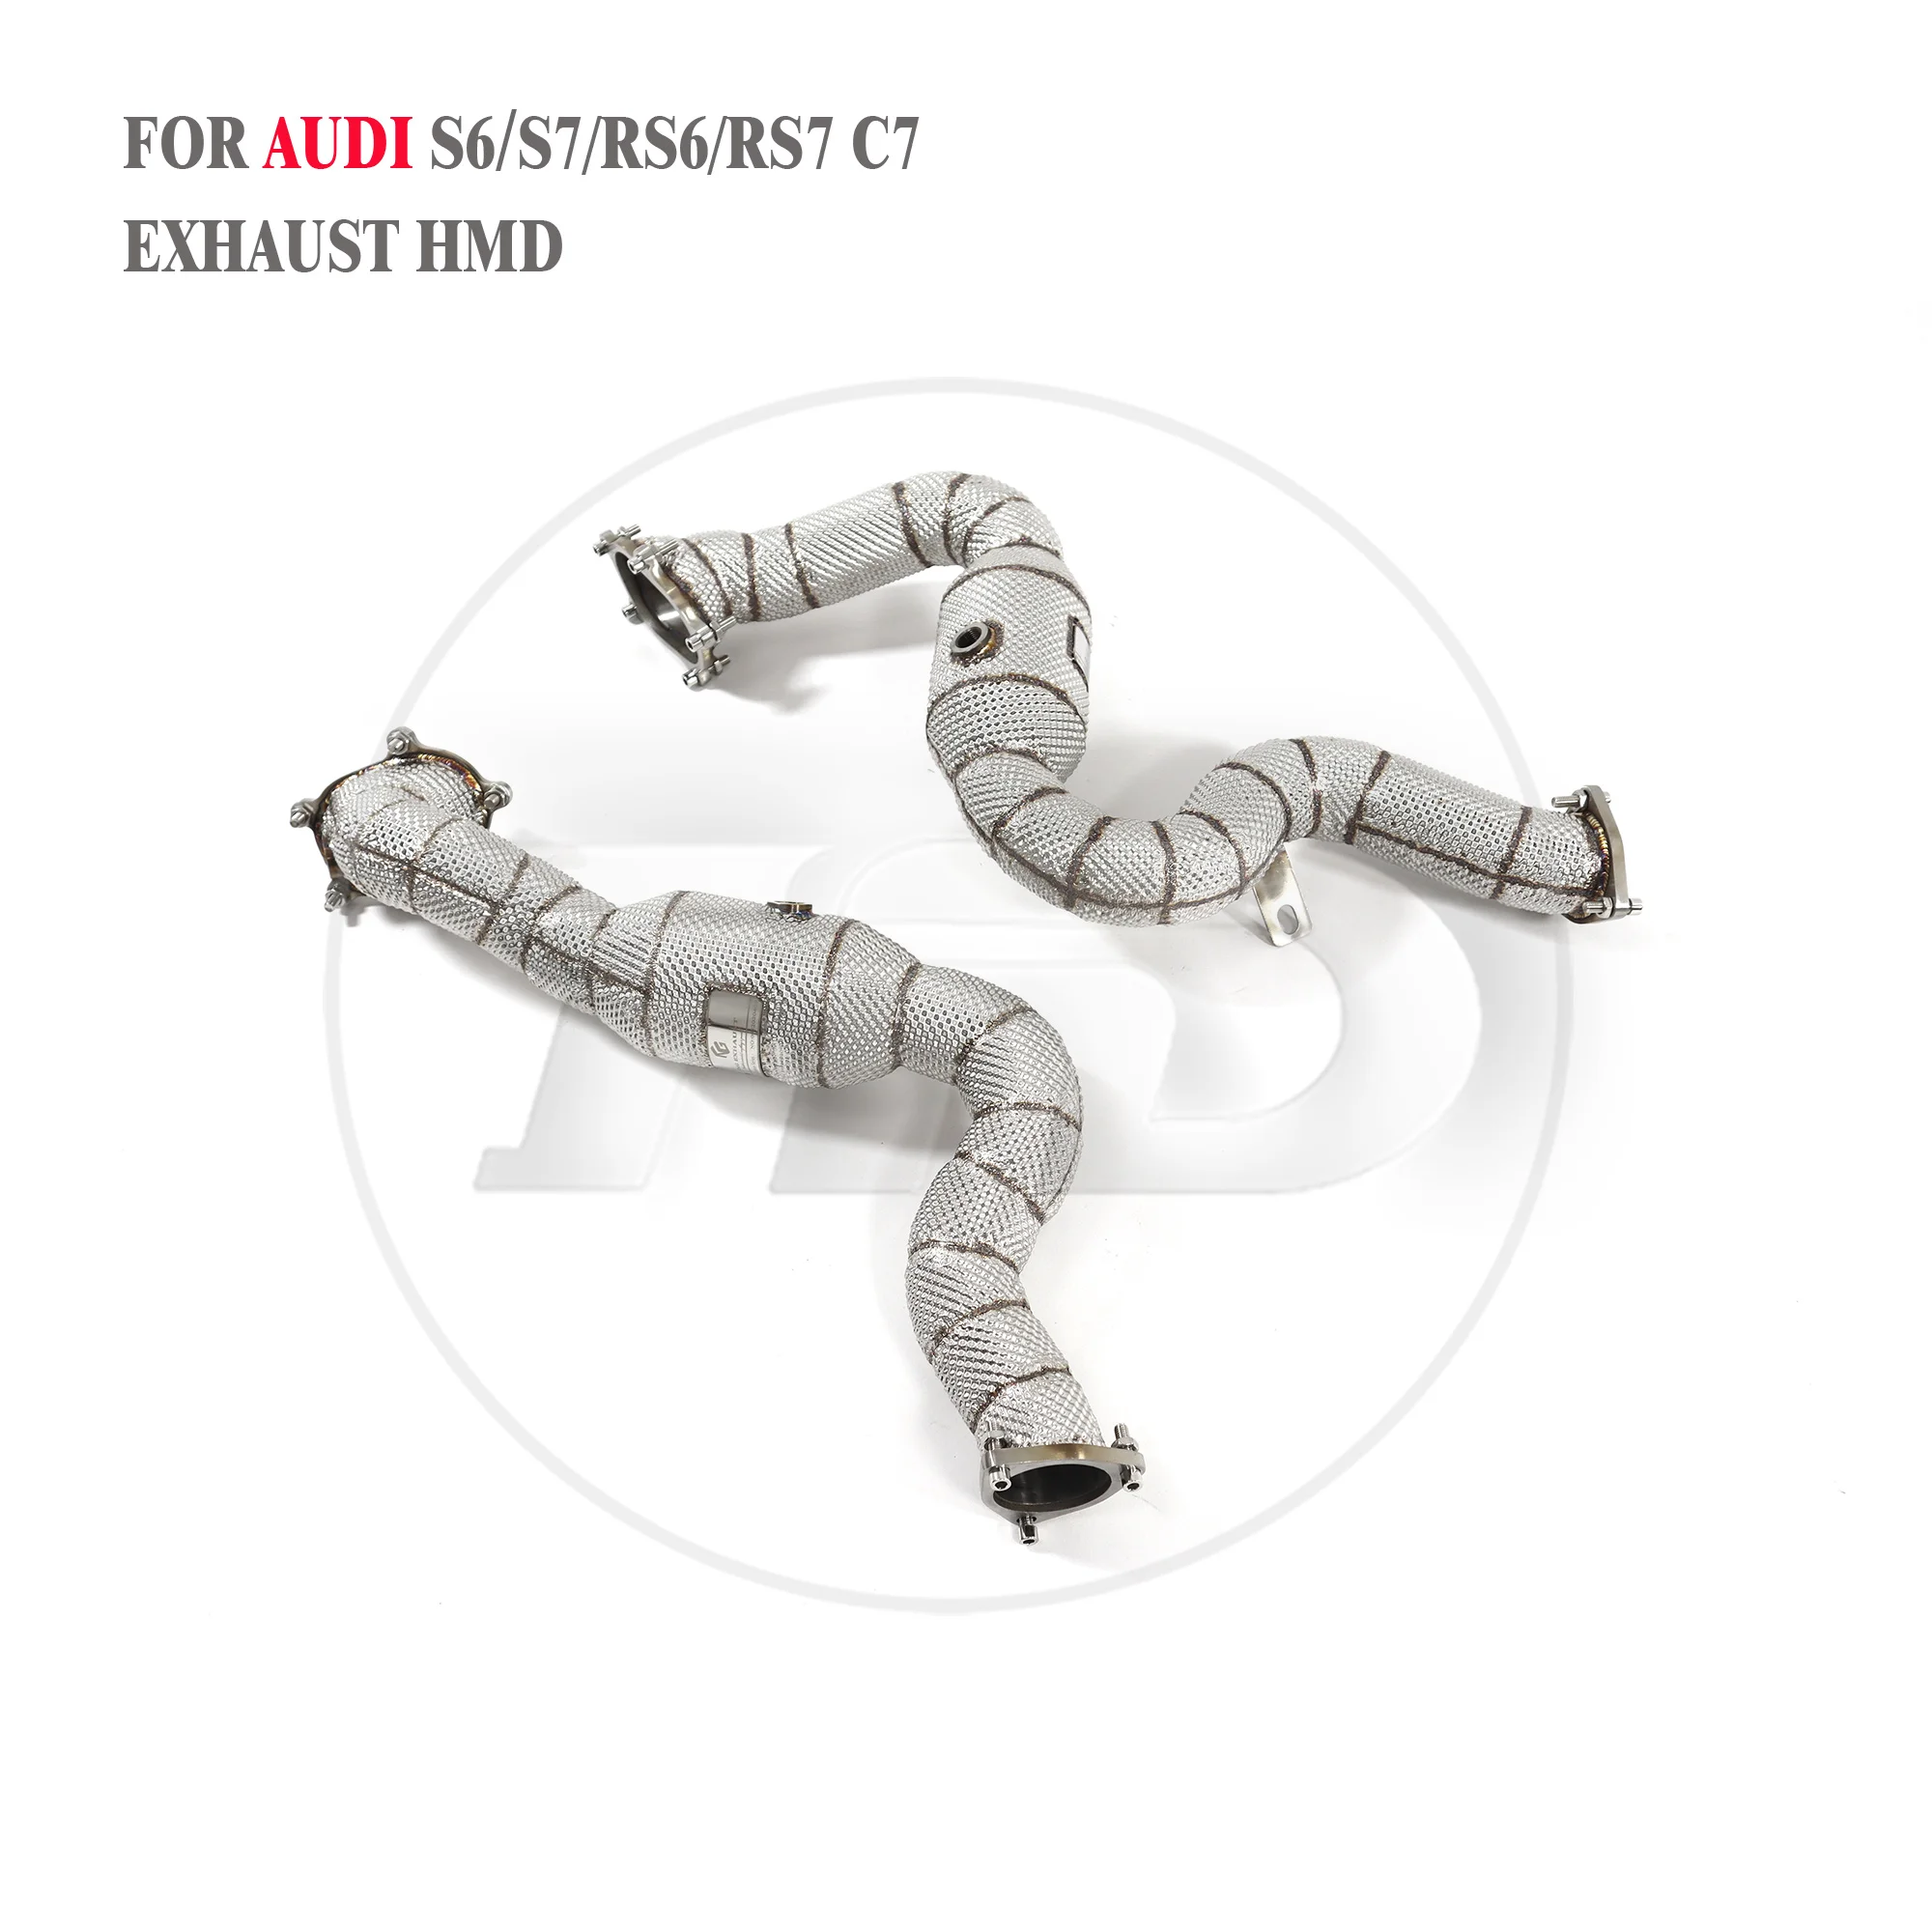 

HMD Exhaust System High Flow Performance Downpipe for Audi S6 S7 RS6 RS7 C7 A8 S8 D4 4.0T 2013-2018